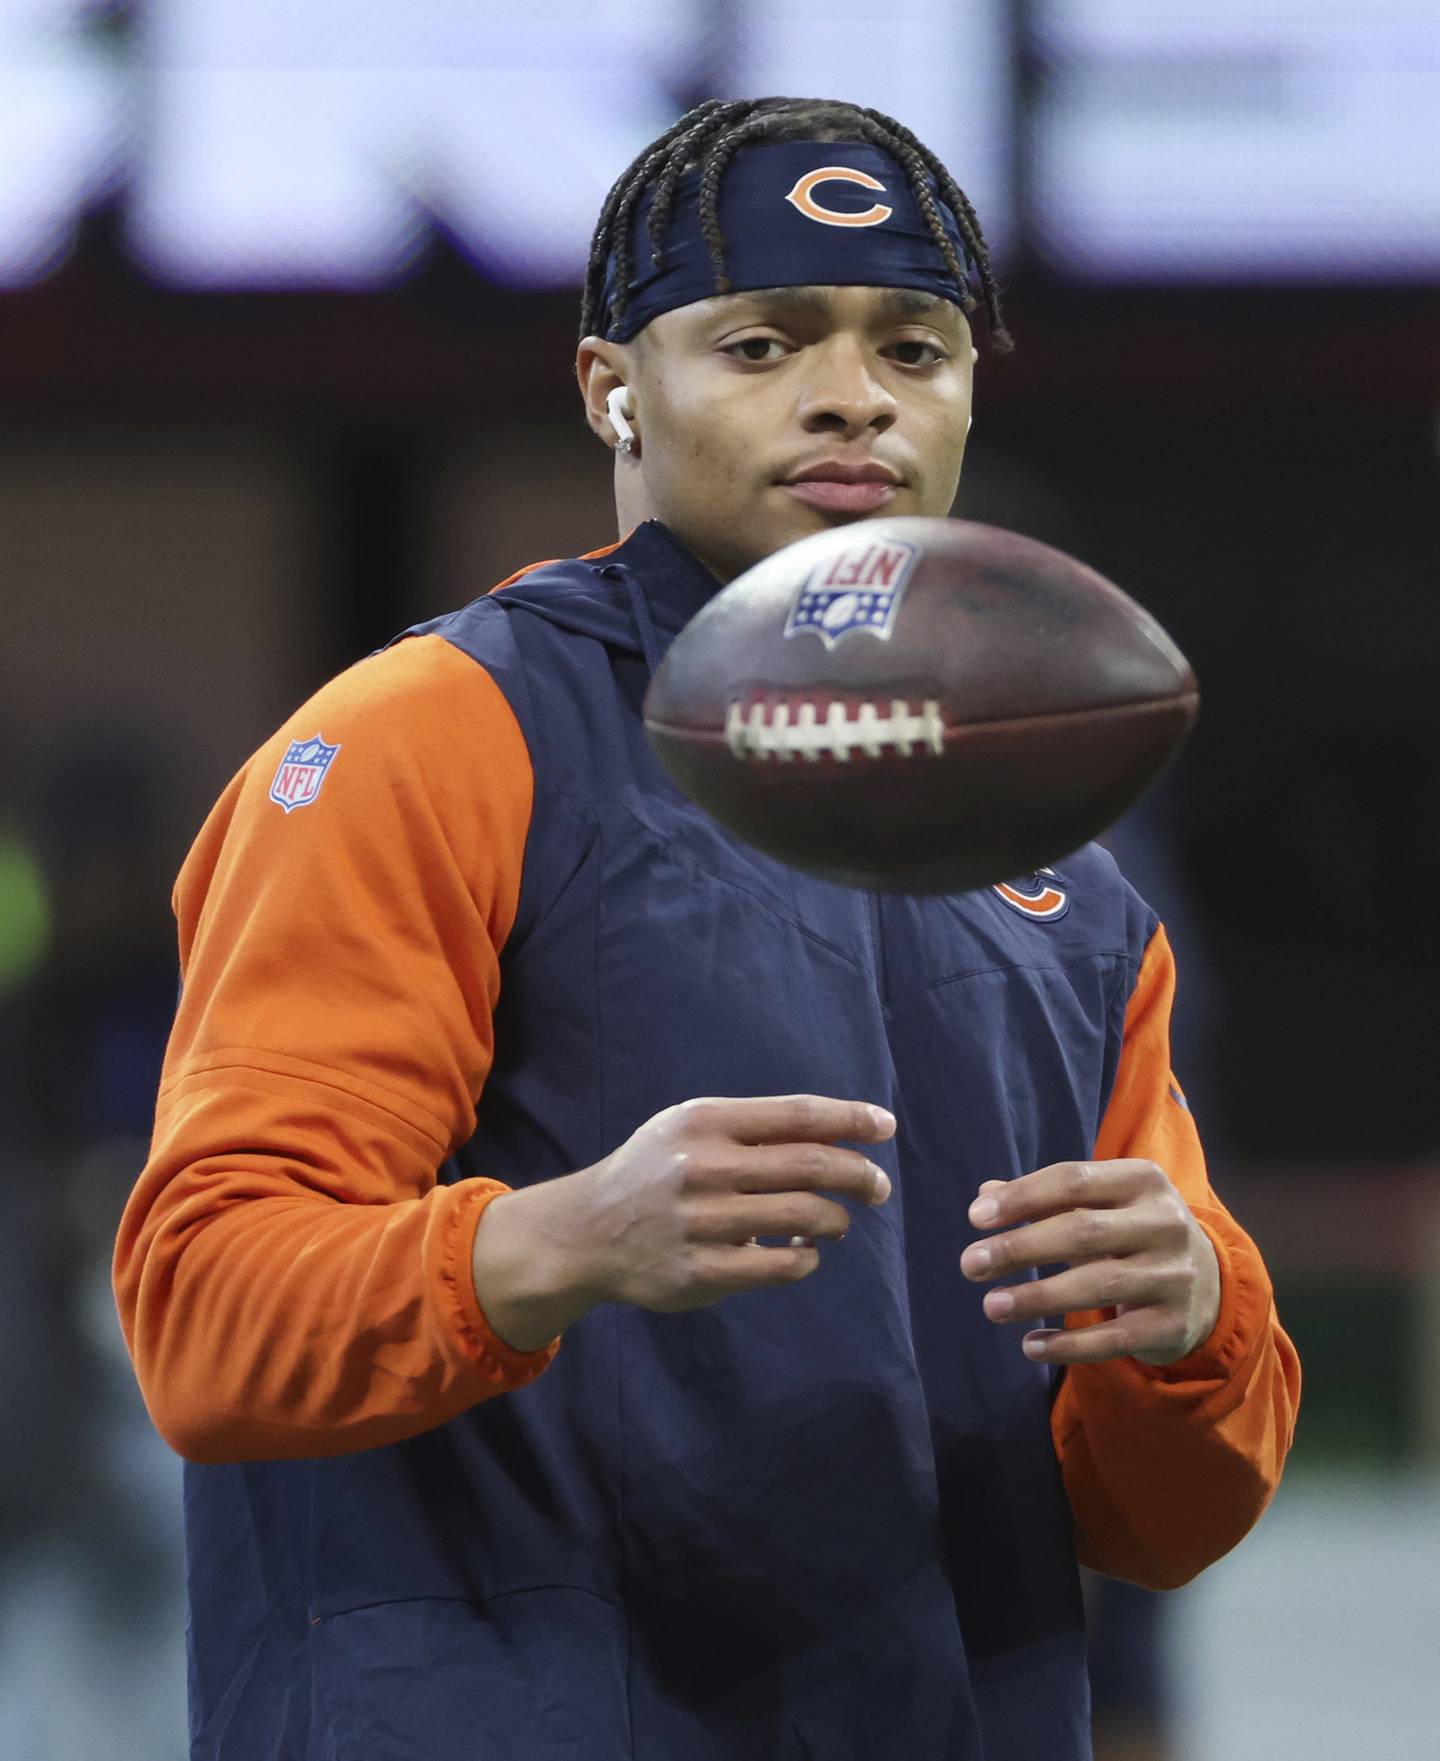 Bears quarterback Justin Fields warms up before a game against the Falcons at Mercedes-Benz Stadium on Nov. 20, 2022.